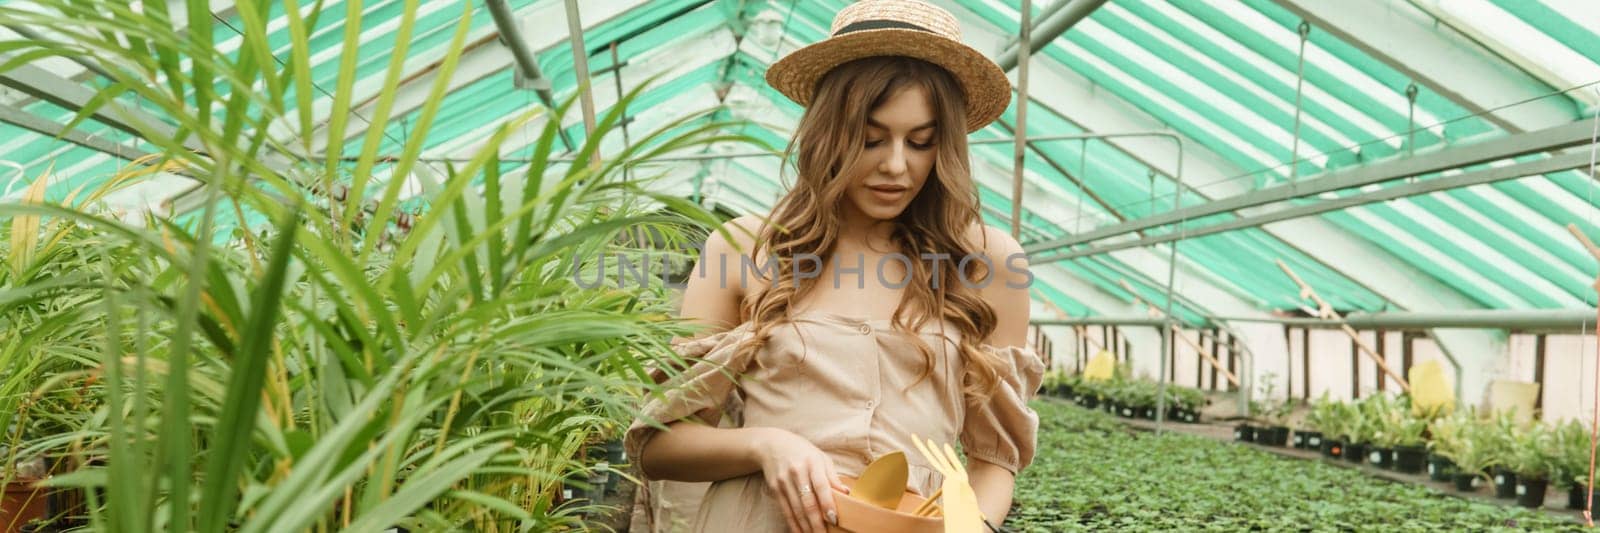 A beautiful young woman takes care of plants in a greenhouse. The concept of gardening and an eco-friendly lifestyle. by Annu1tochka